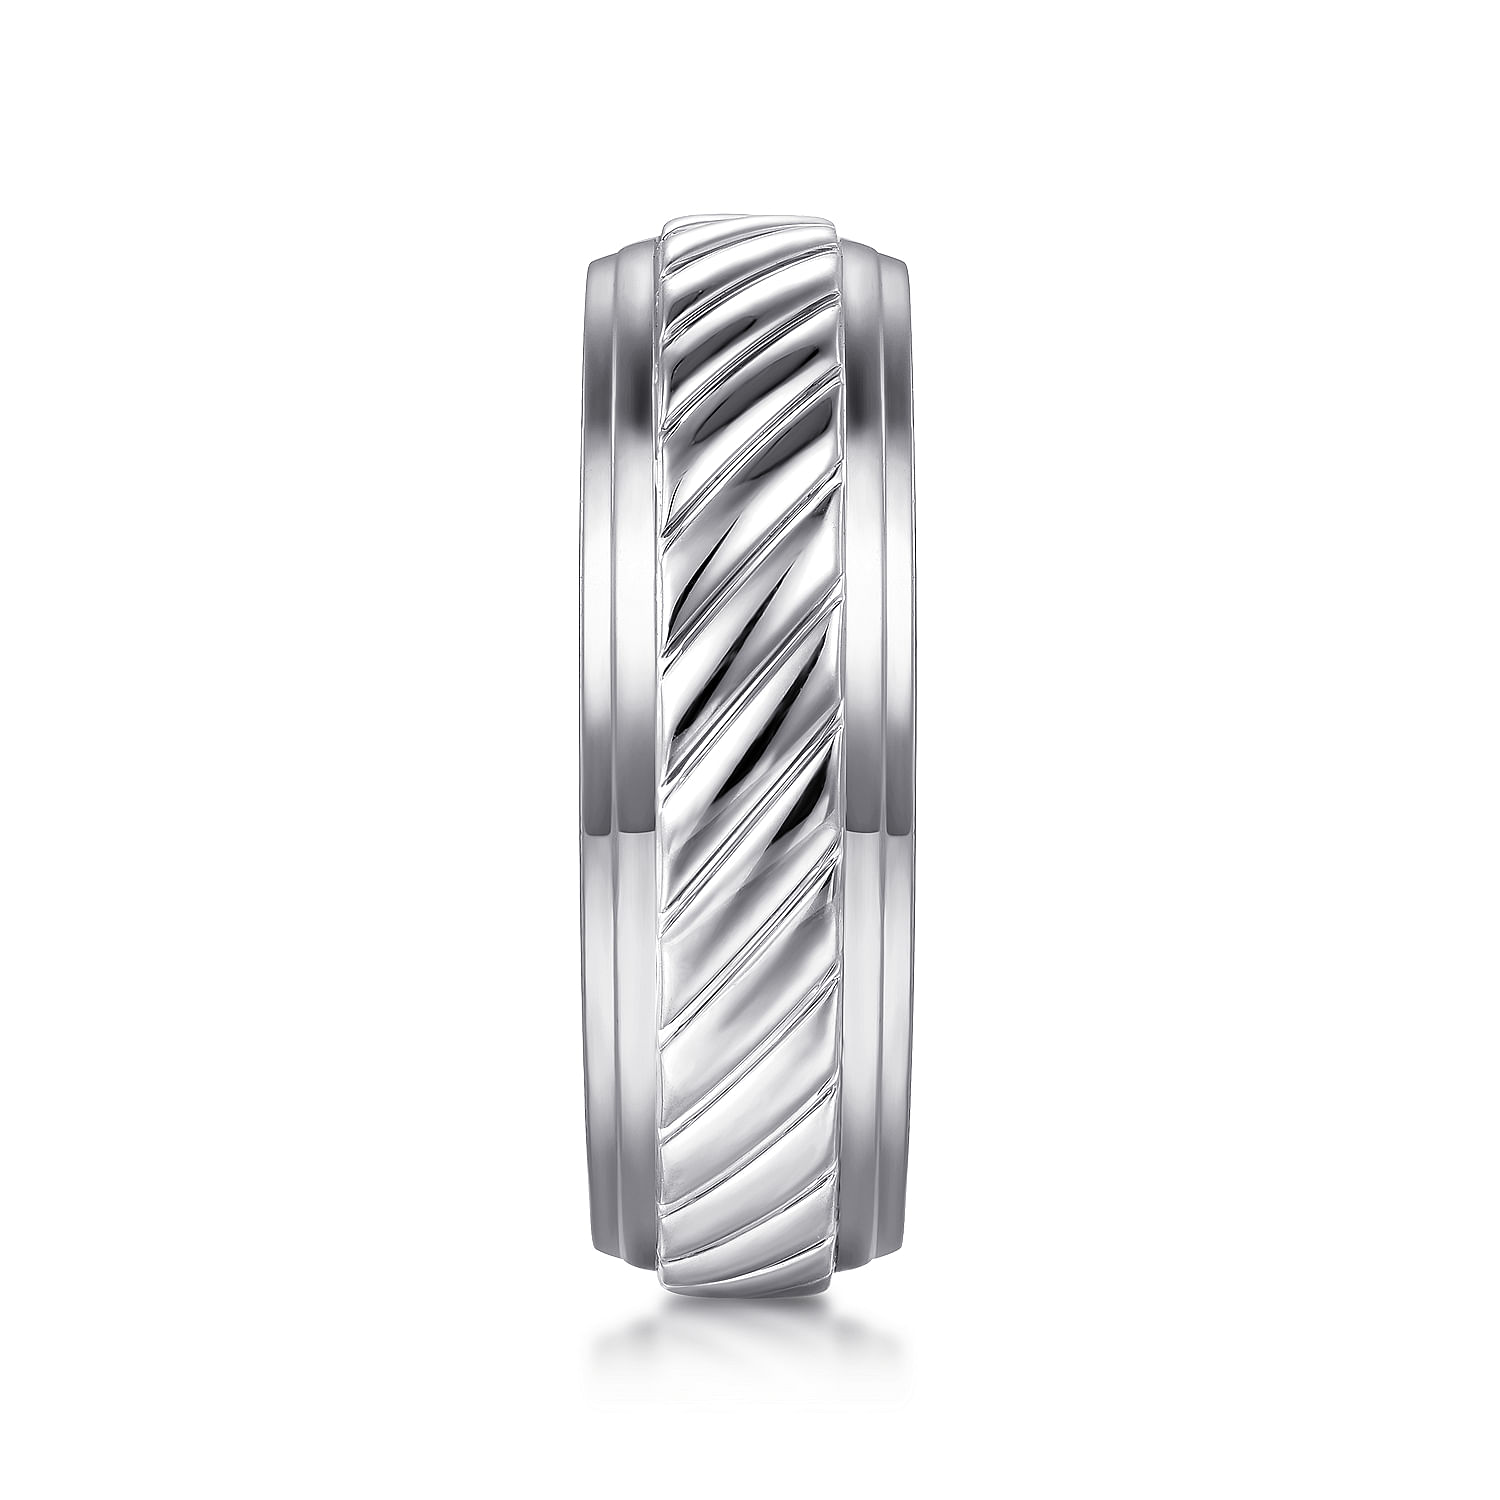 14K White Gold 7mm - Rope Center and Polished Edge Men's Wedding Band in High Polished Finish